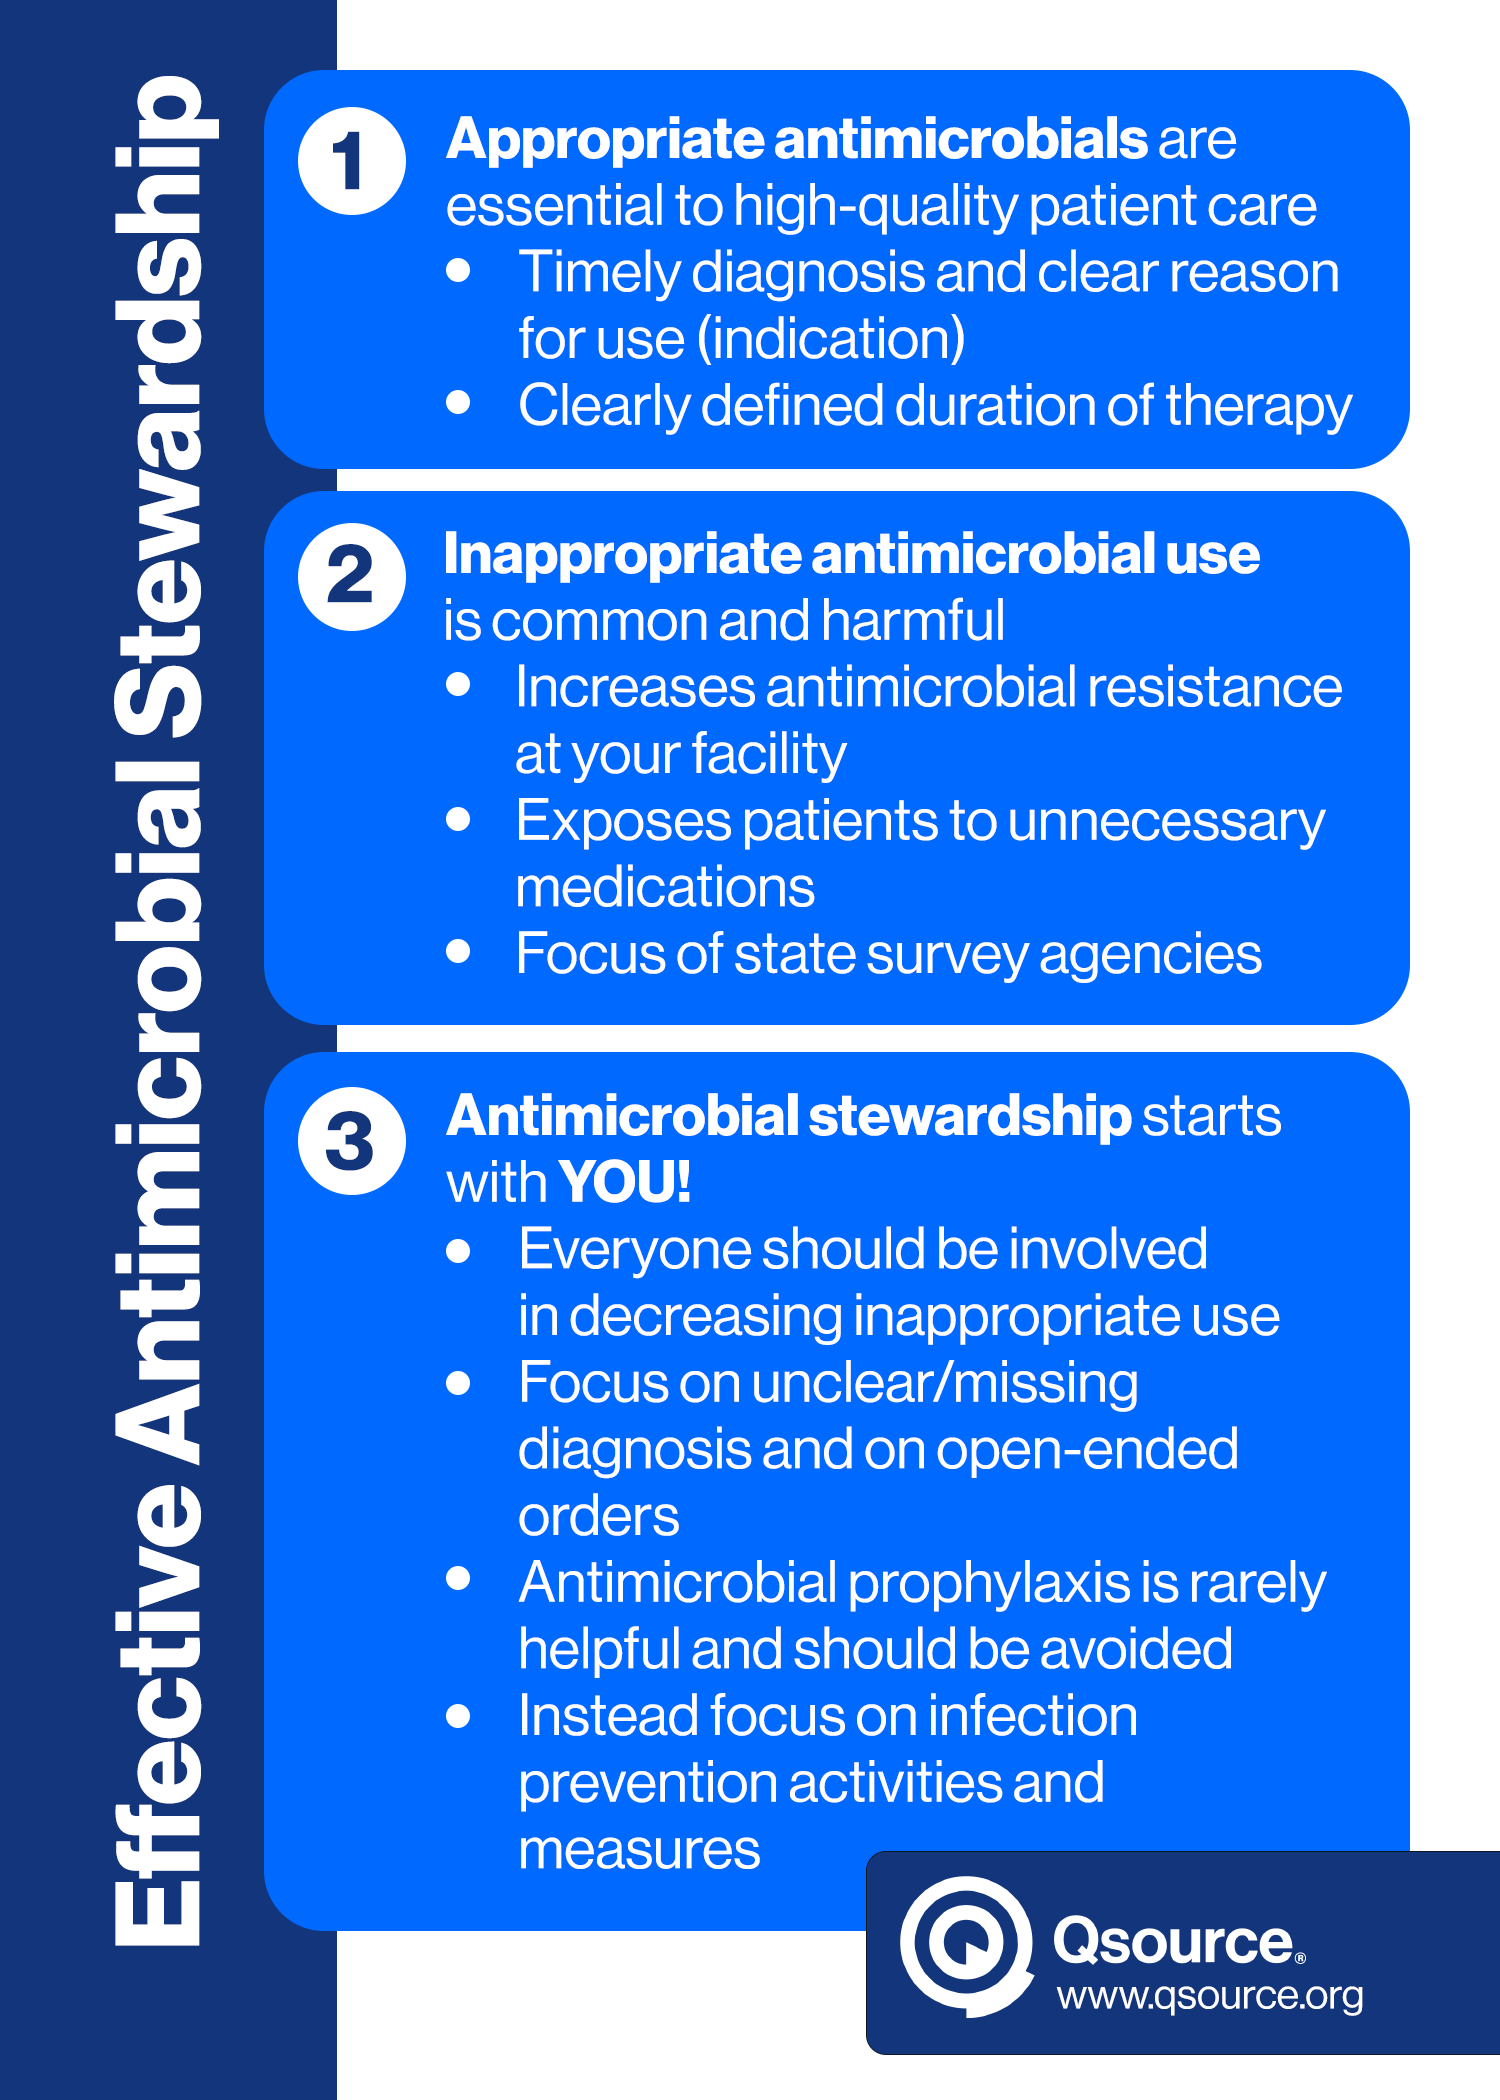 Screen shot of the effective antimicrobial stewardship postcard